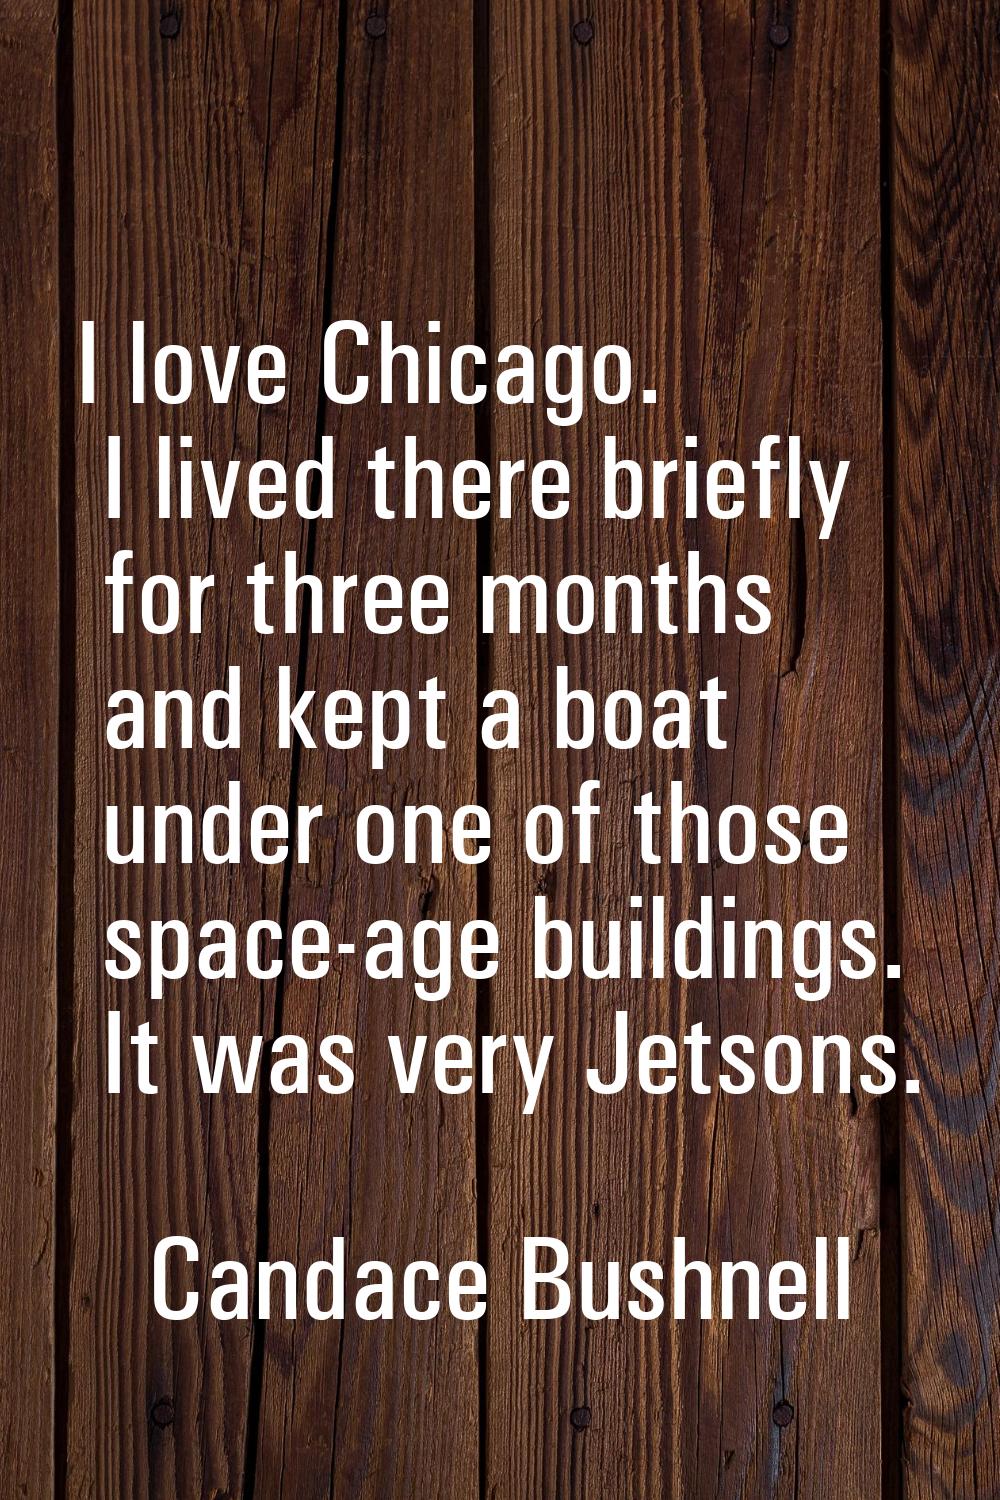 I love Chicago. I lived there briefly for three months and kept a boat under one of those space-age